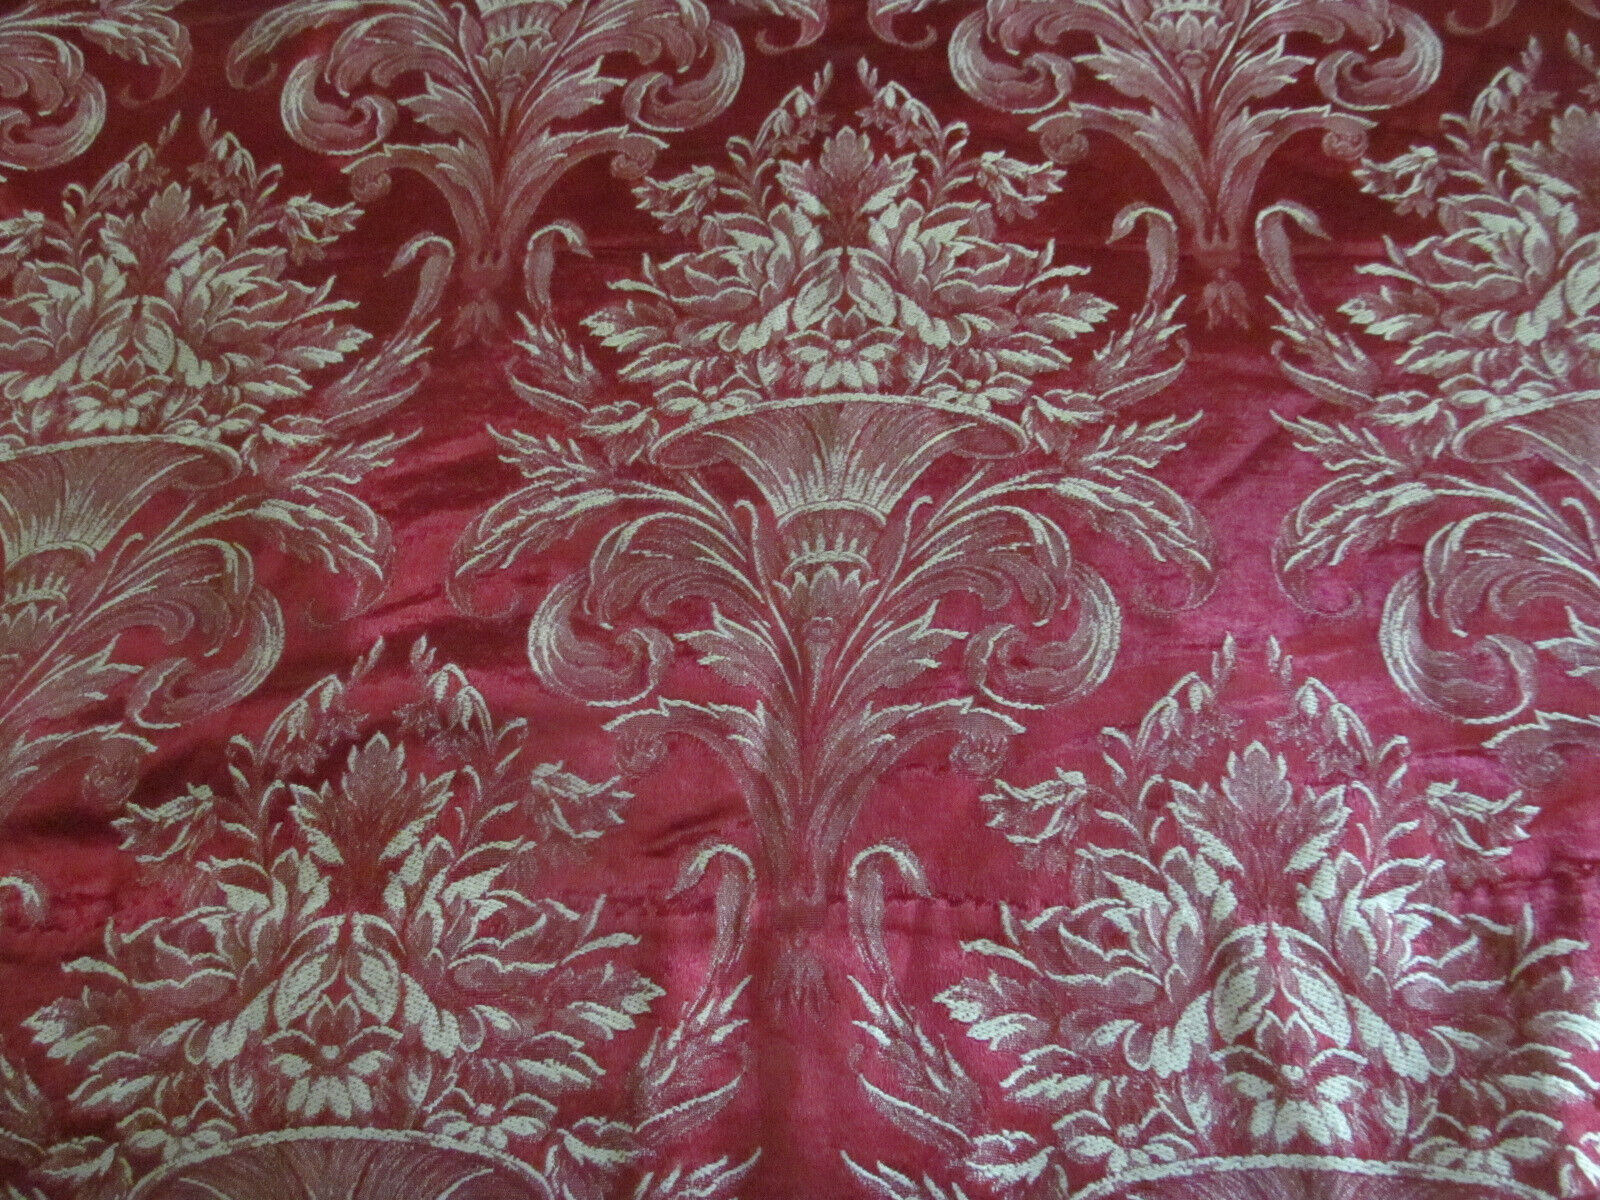 7.5 yards~Urn of Flowers Scrolls Antique Red Satin Damask Jaquard Fabric~Heavy